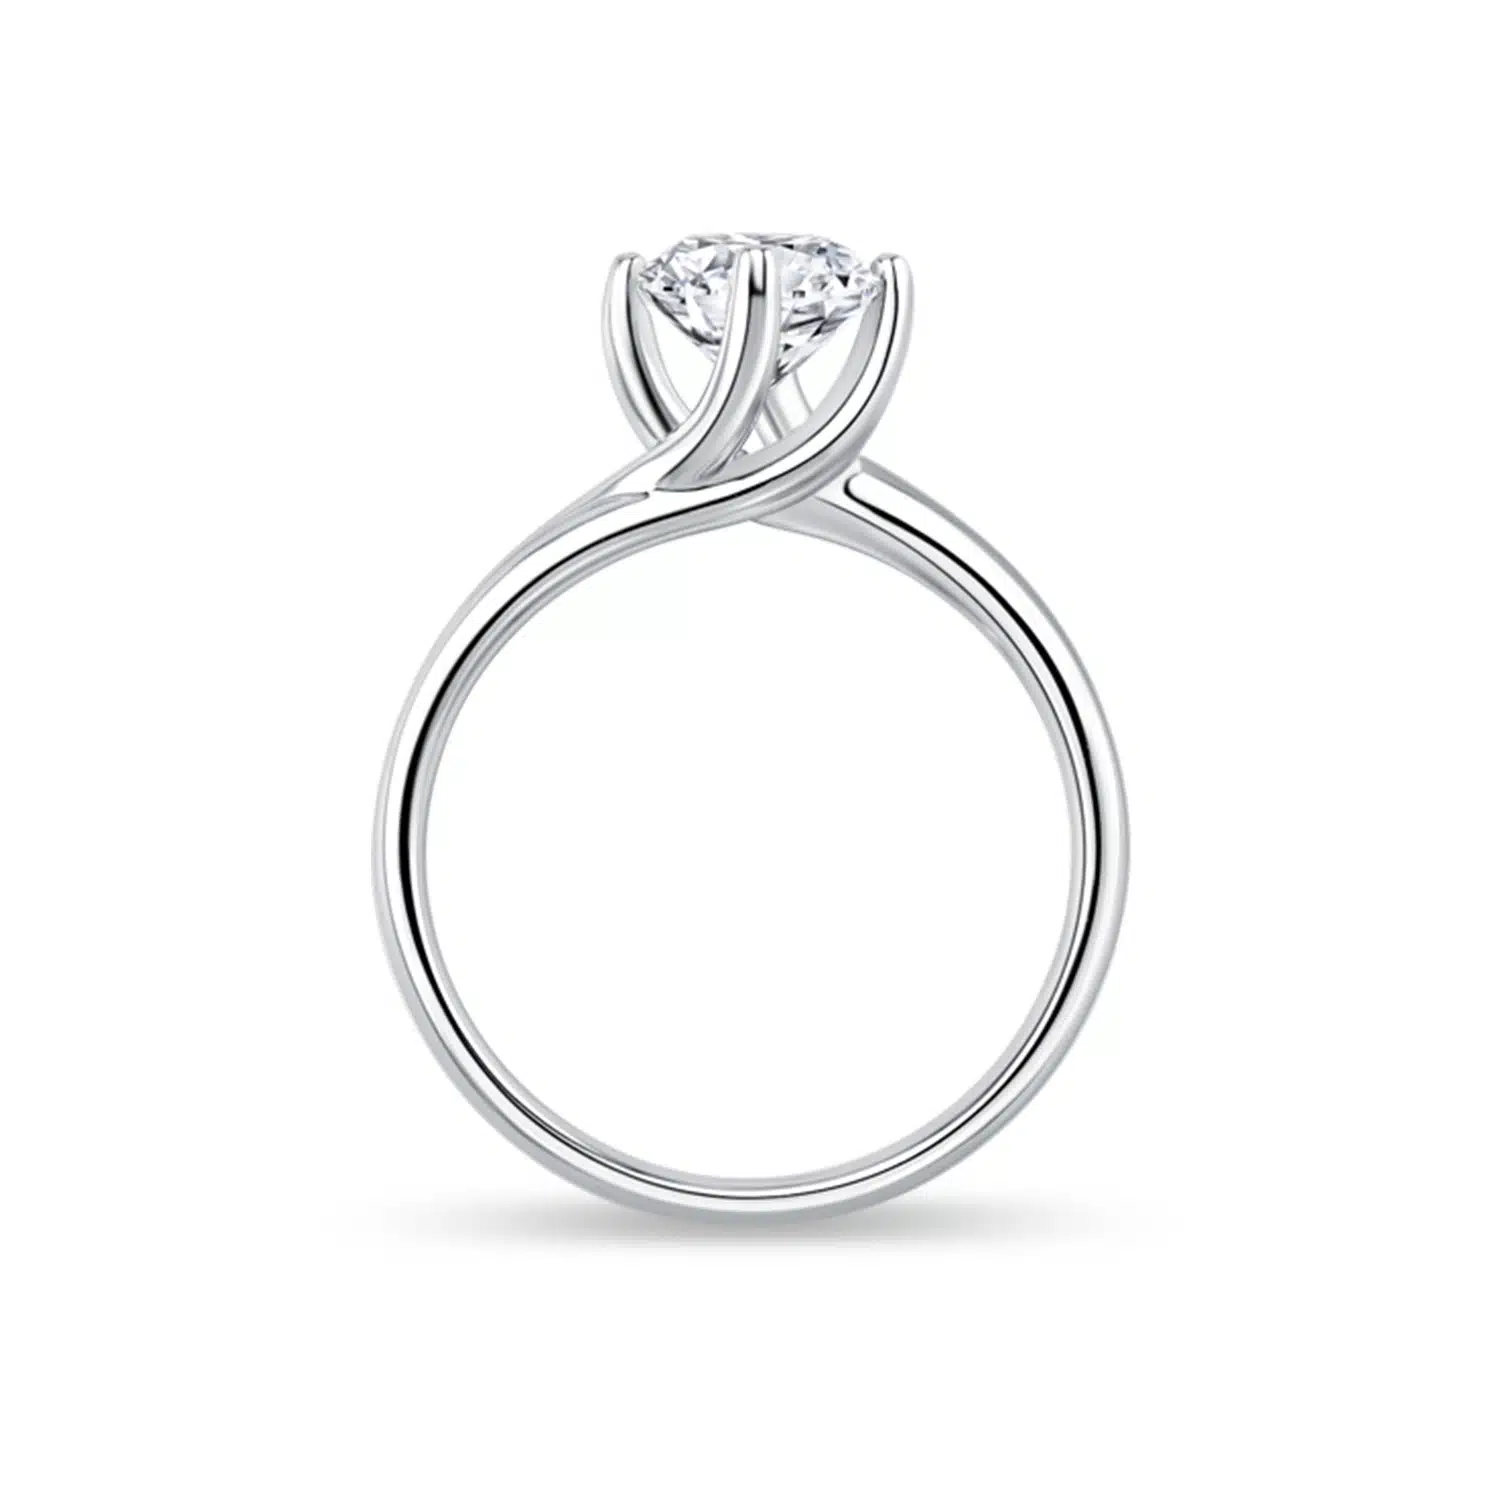 SK SOLITAIRE RING in 18k or 14k white gold twirl setting STAR CARAT CLASSIC TWIRL